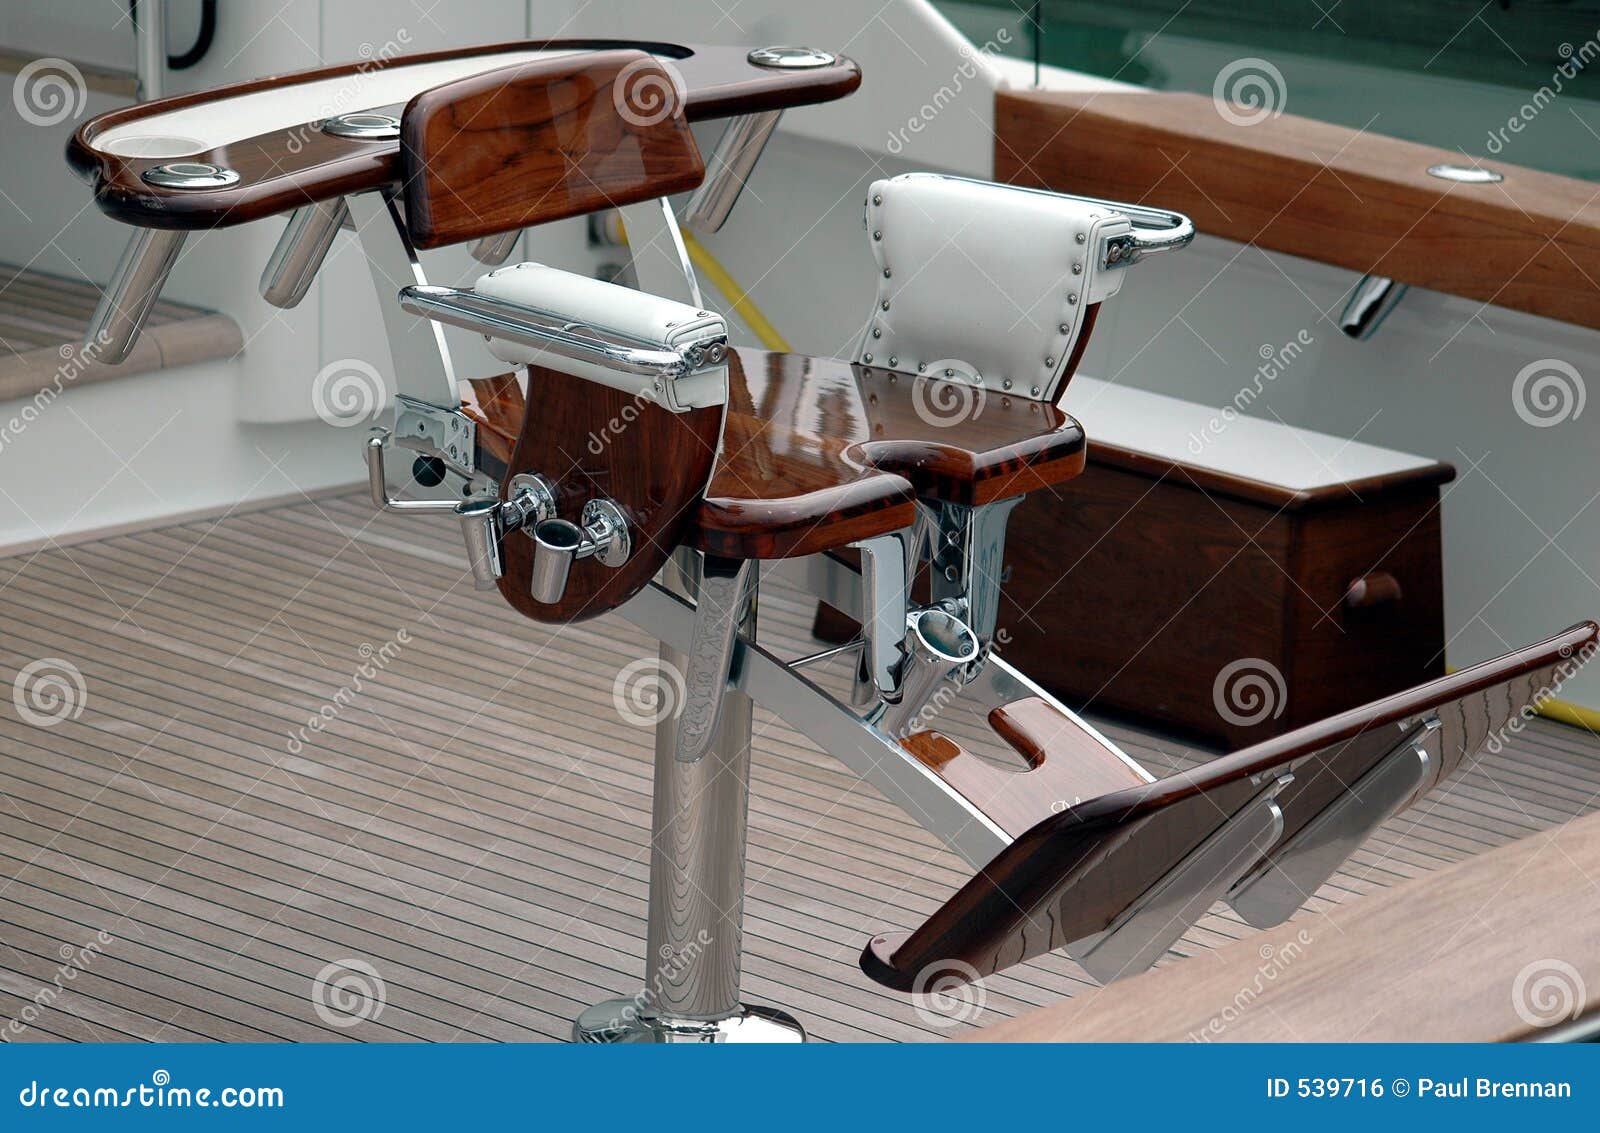 sport fishing chair stock photo. image of game, fish